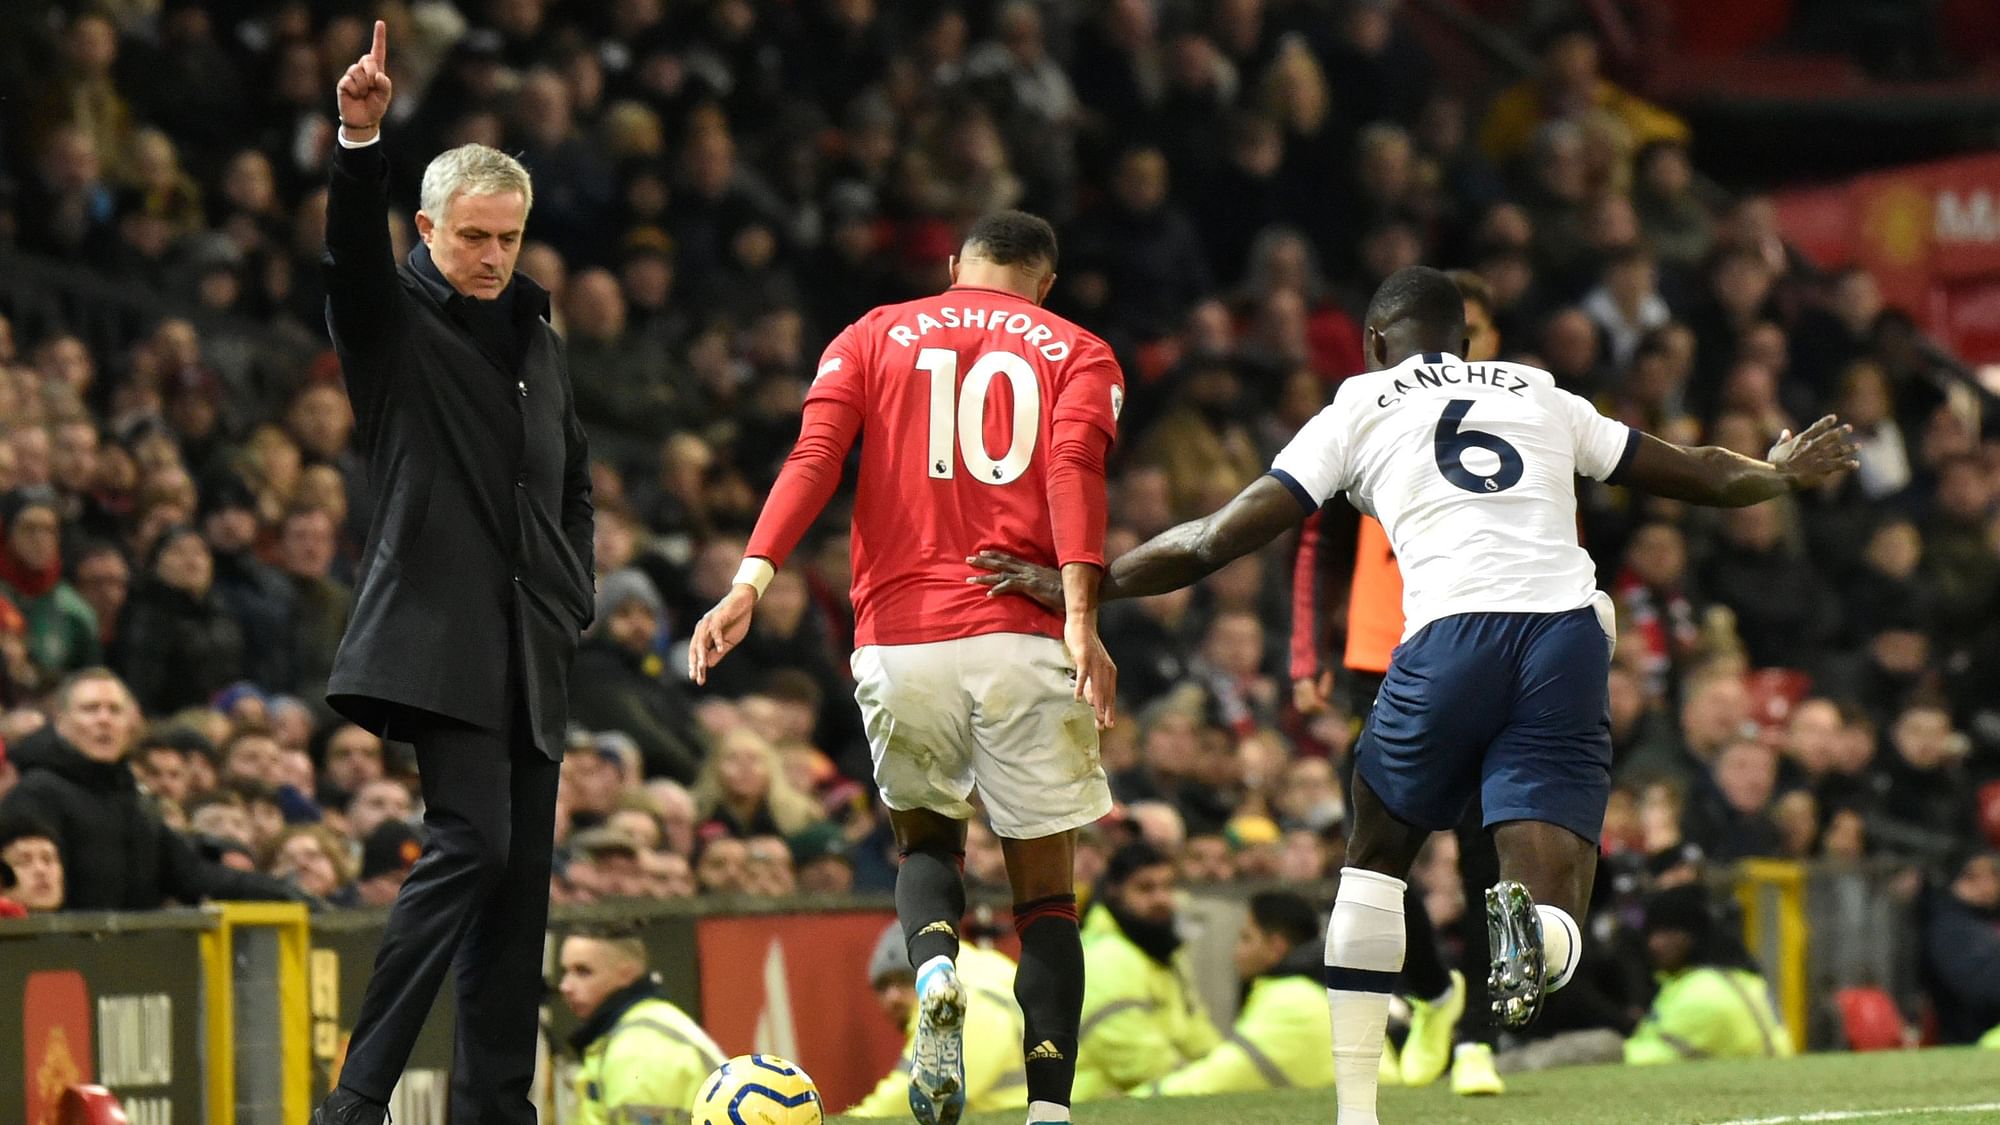 Tottenham’s manager Jose Mourinho, left, reacts as Manchester United’s Marcus Rashford, centre, and Tottenham’s Davinson Sanchez challenge for the ball during the English Premier League match.